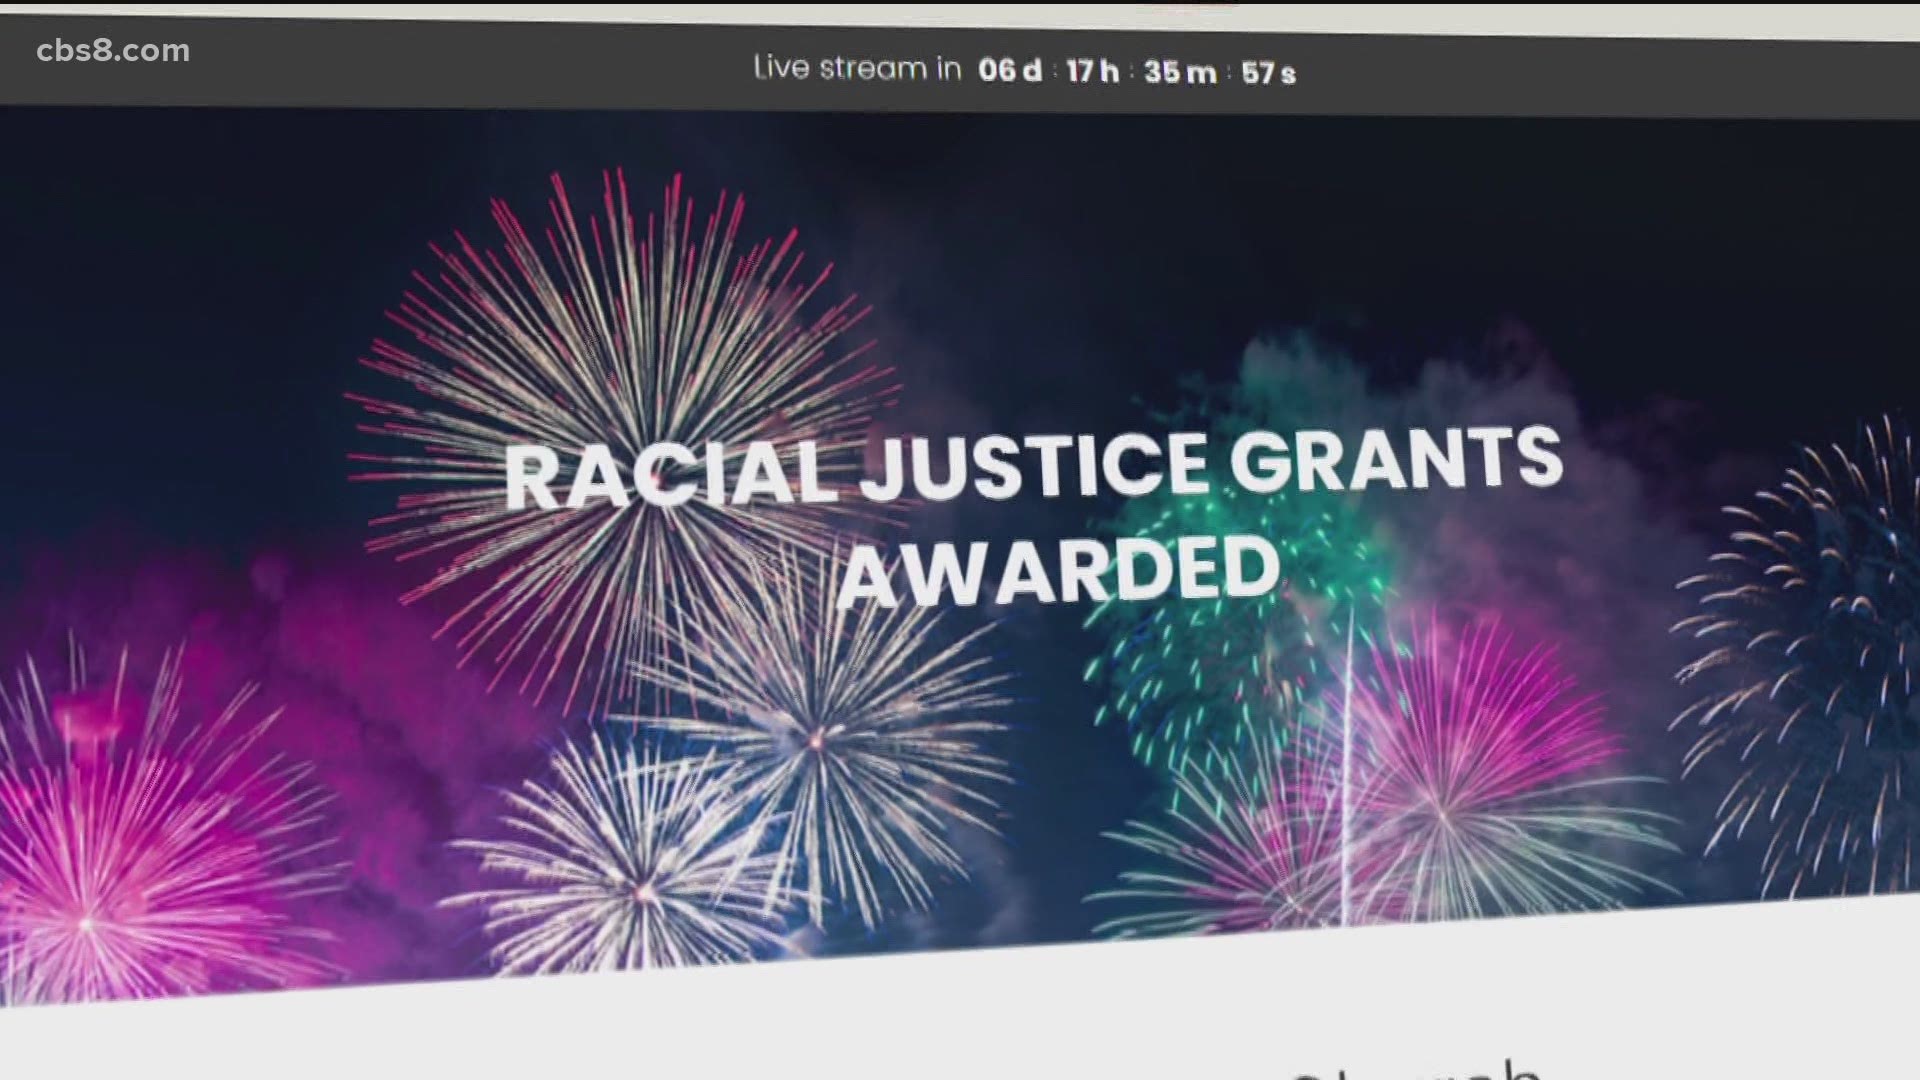 The $50,000 Racial Justice endowment program supports organizations that address issues of racism, social justice and bettering the lives of people of color.